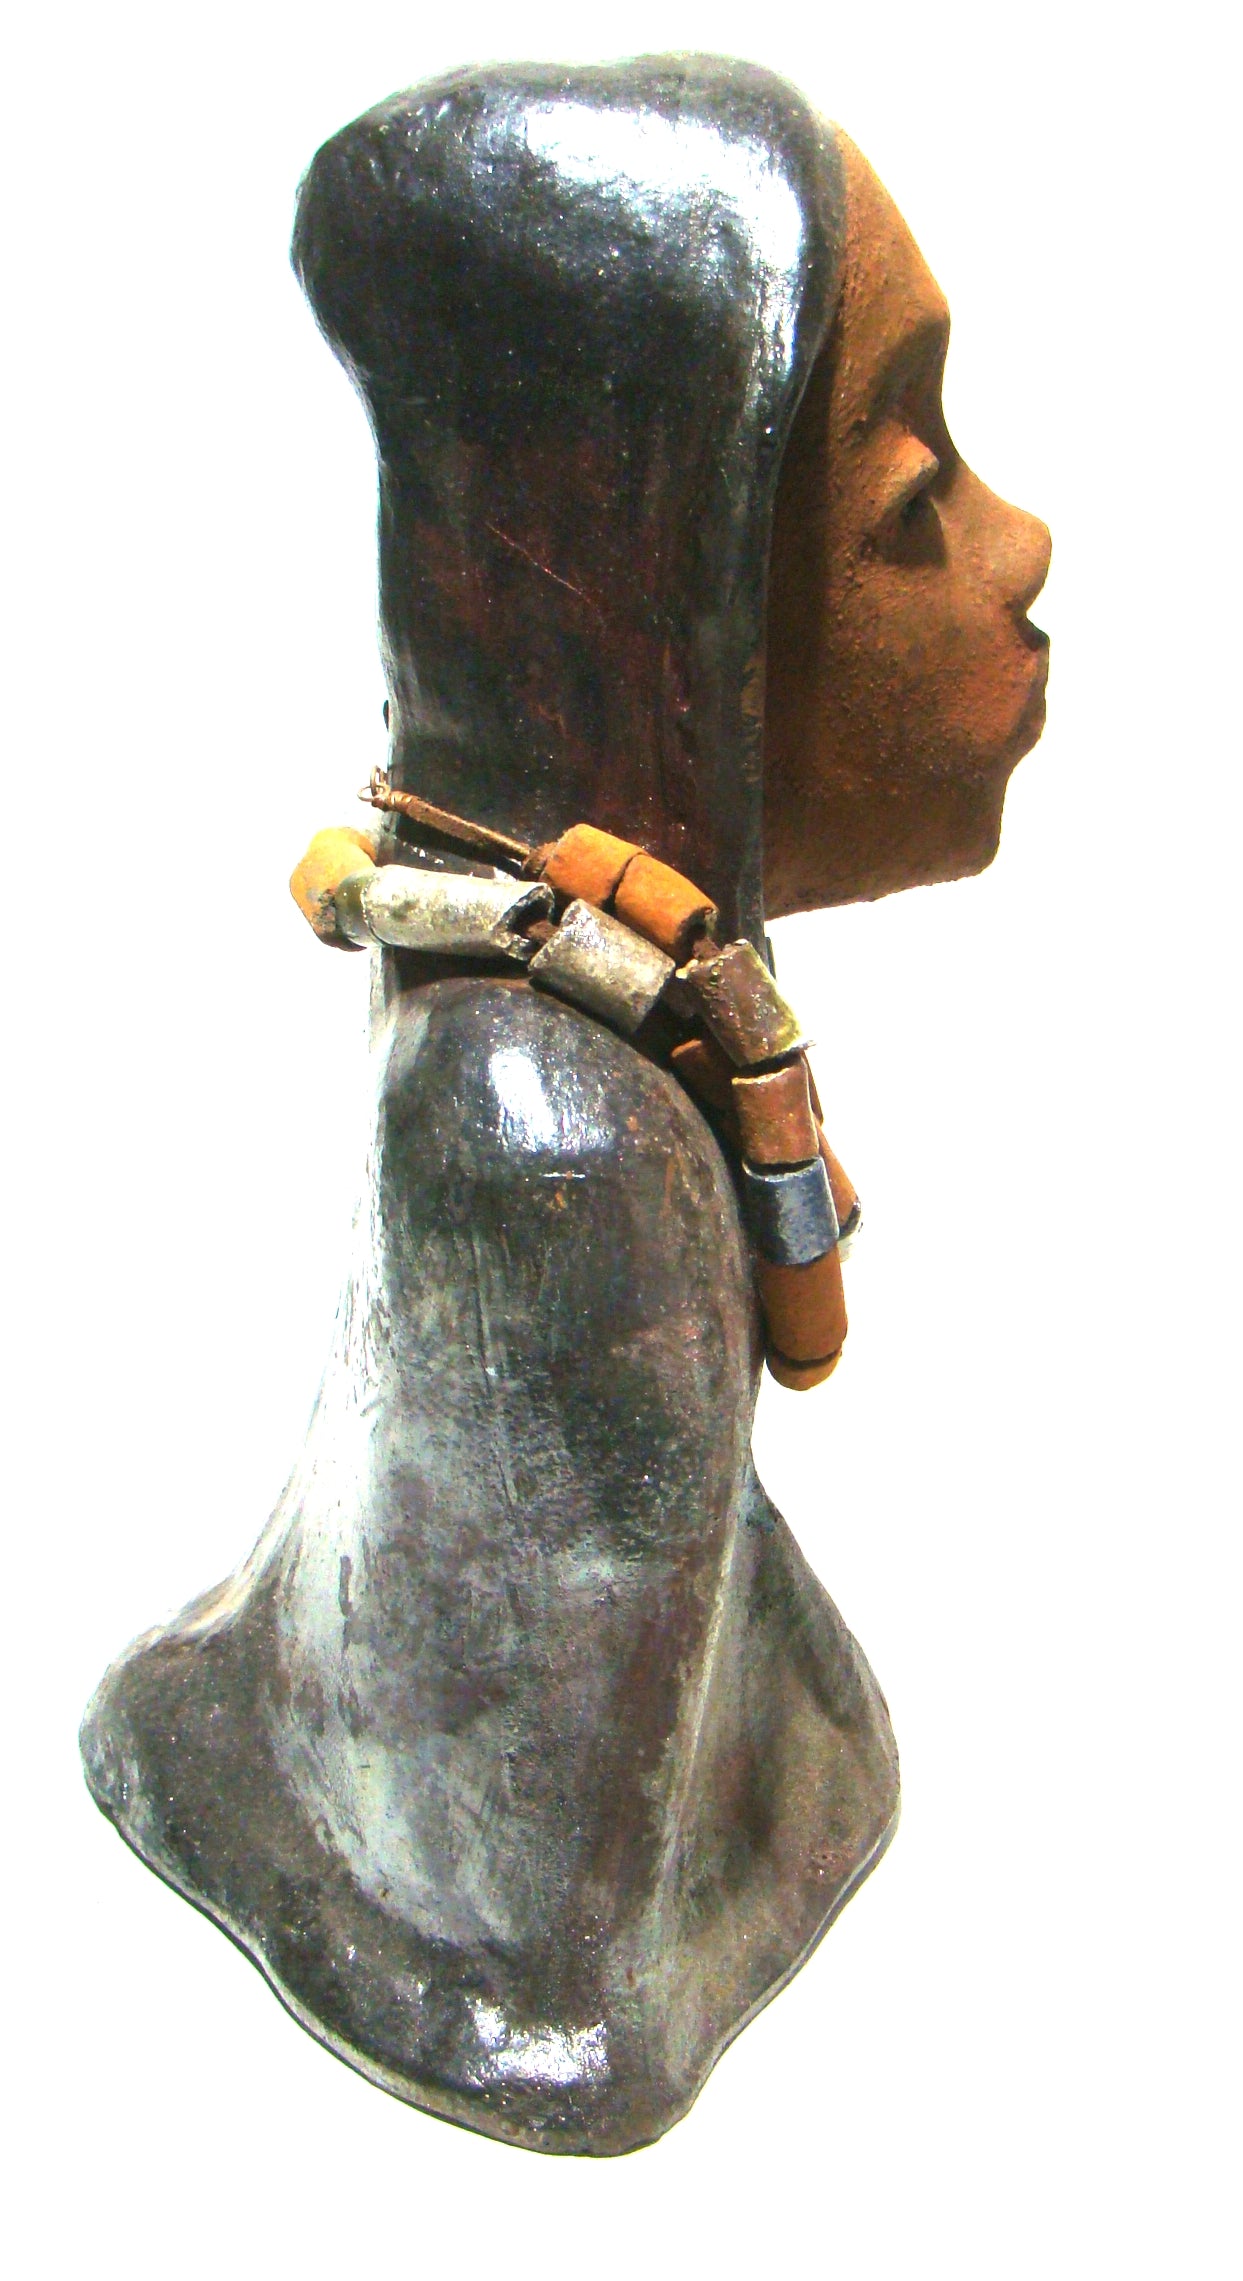 Carlos stands 15" 10" x 7" and weighs 6.13 lbs. He wears a metallic multi colored hoodie with earthy raku beads. Carlos has a honey brown complexion. He seems to be in deep thought. Carlos would add gentleness to that special place in your home.